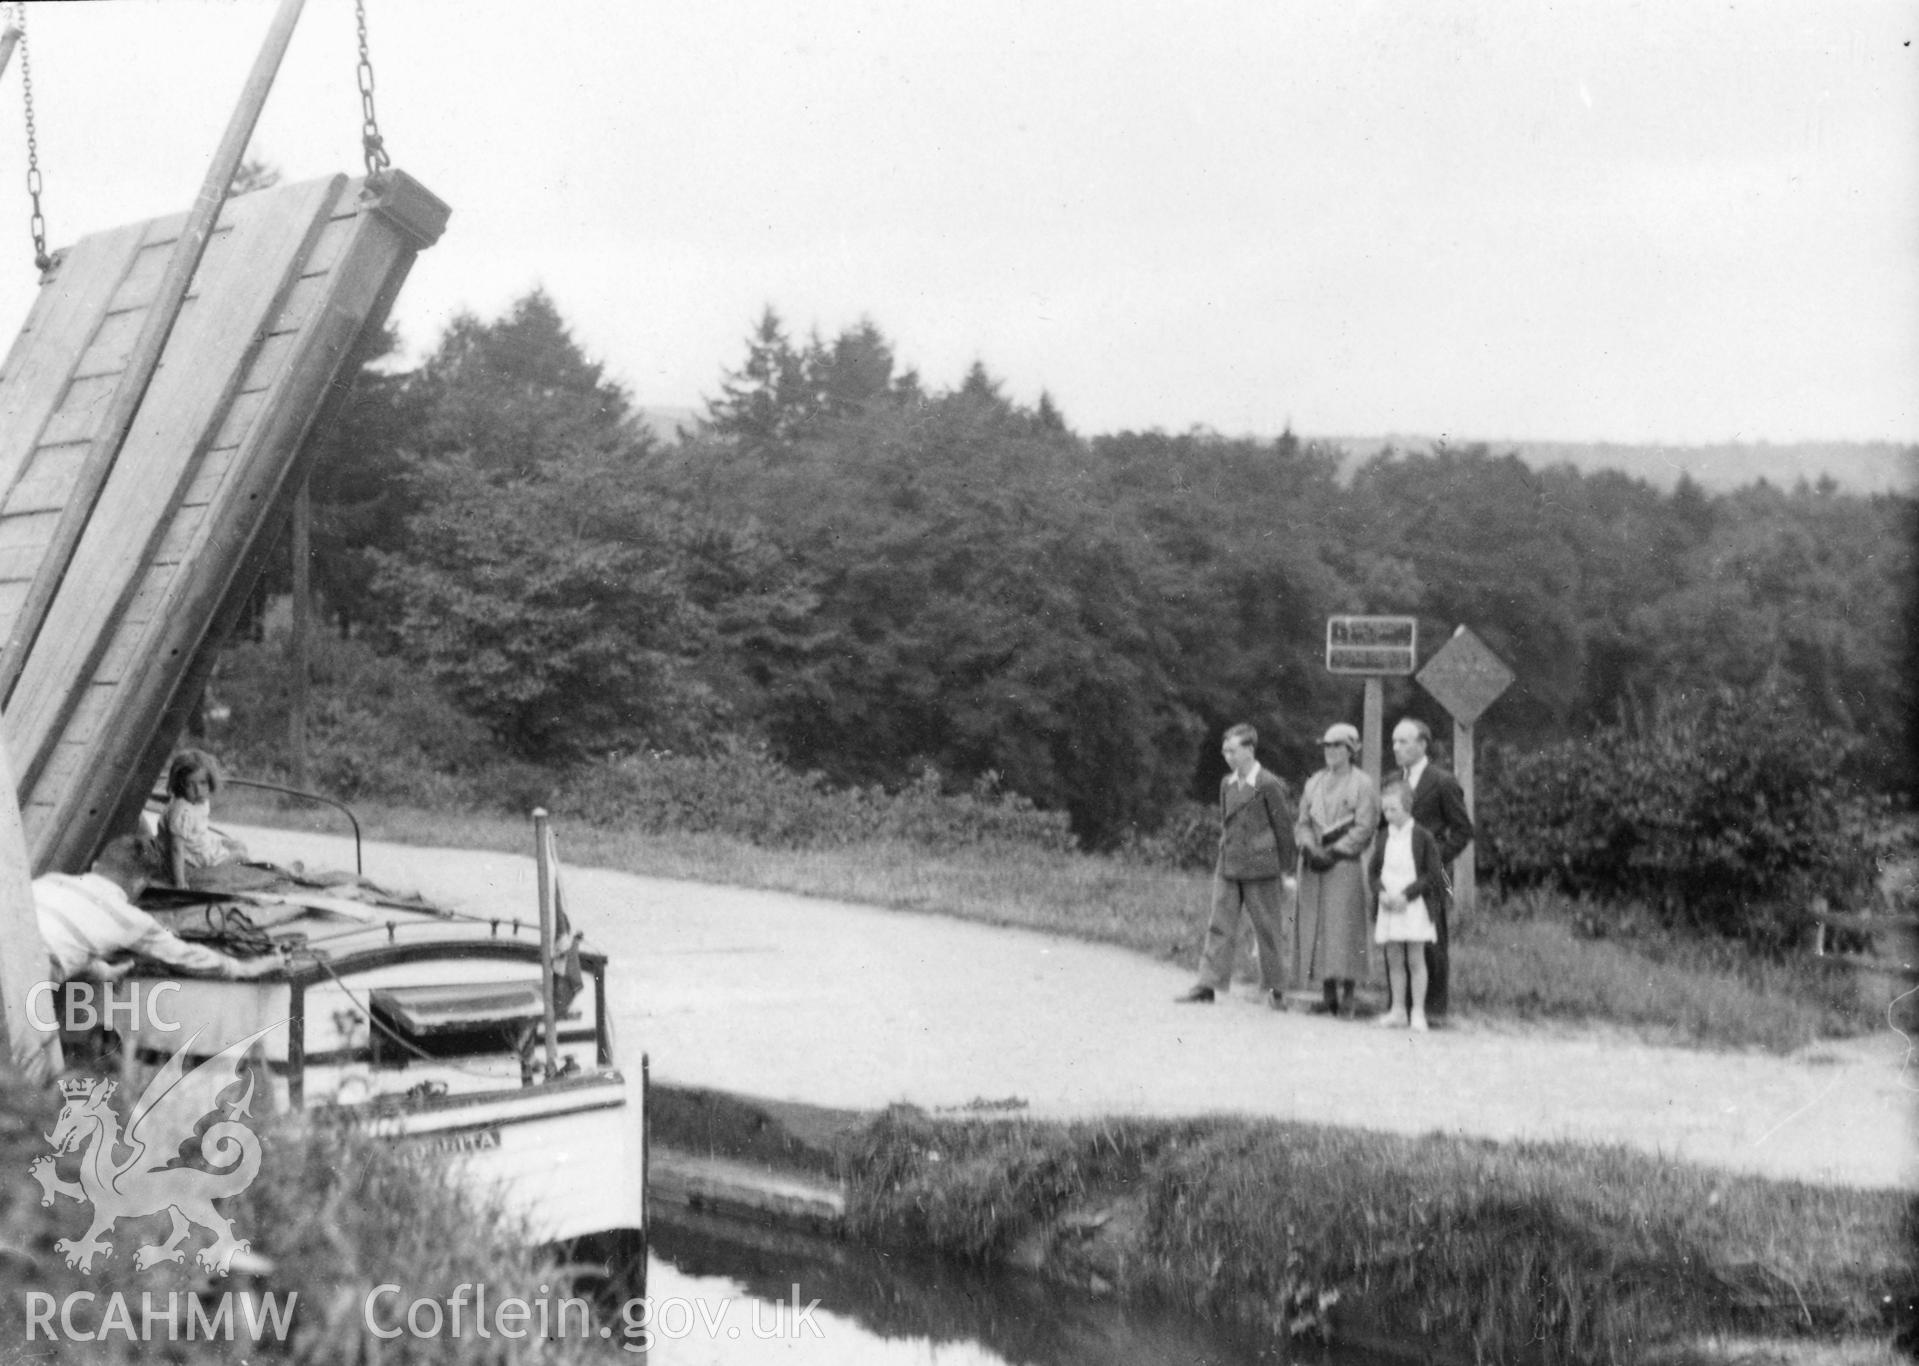 Llangollen Canal; digitized copy of a circa 1940 black and white photograph taken from a photo album loaned for copying by Anne Eastham.